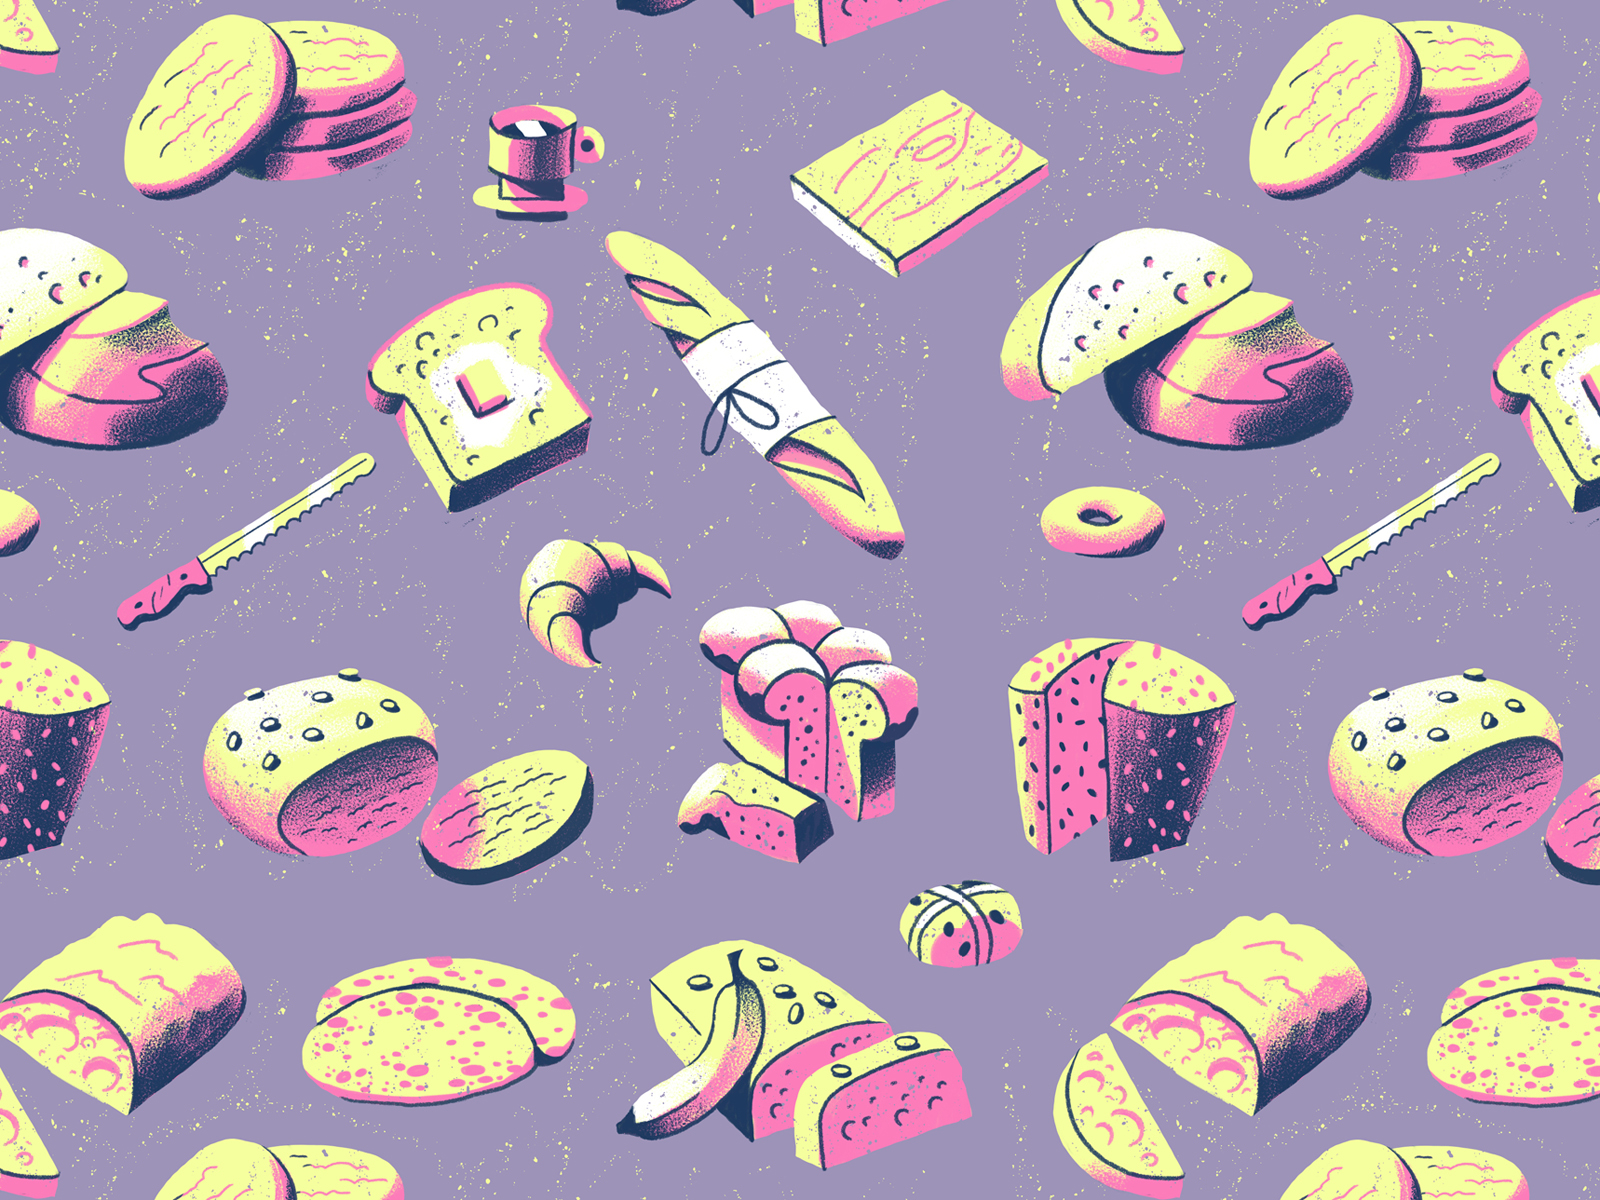 Baked design drawing eat food graphic icon illustration muti pattern retro snack texture wallpaper